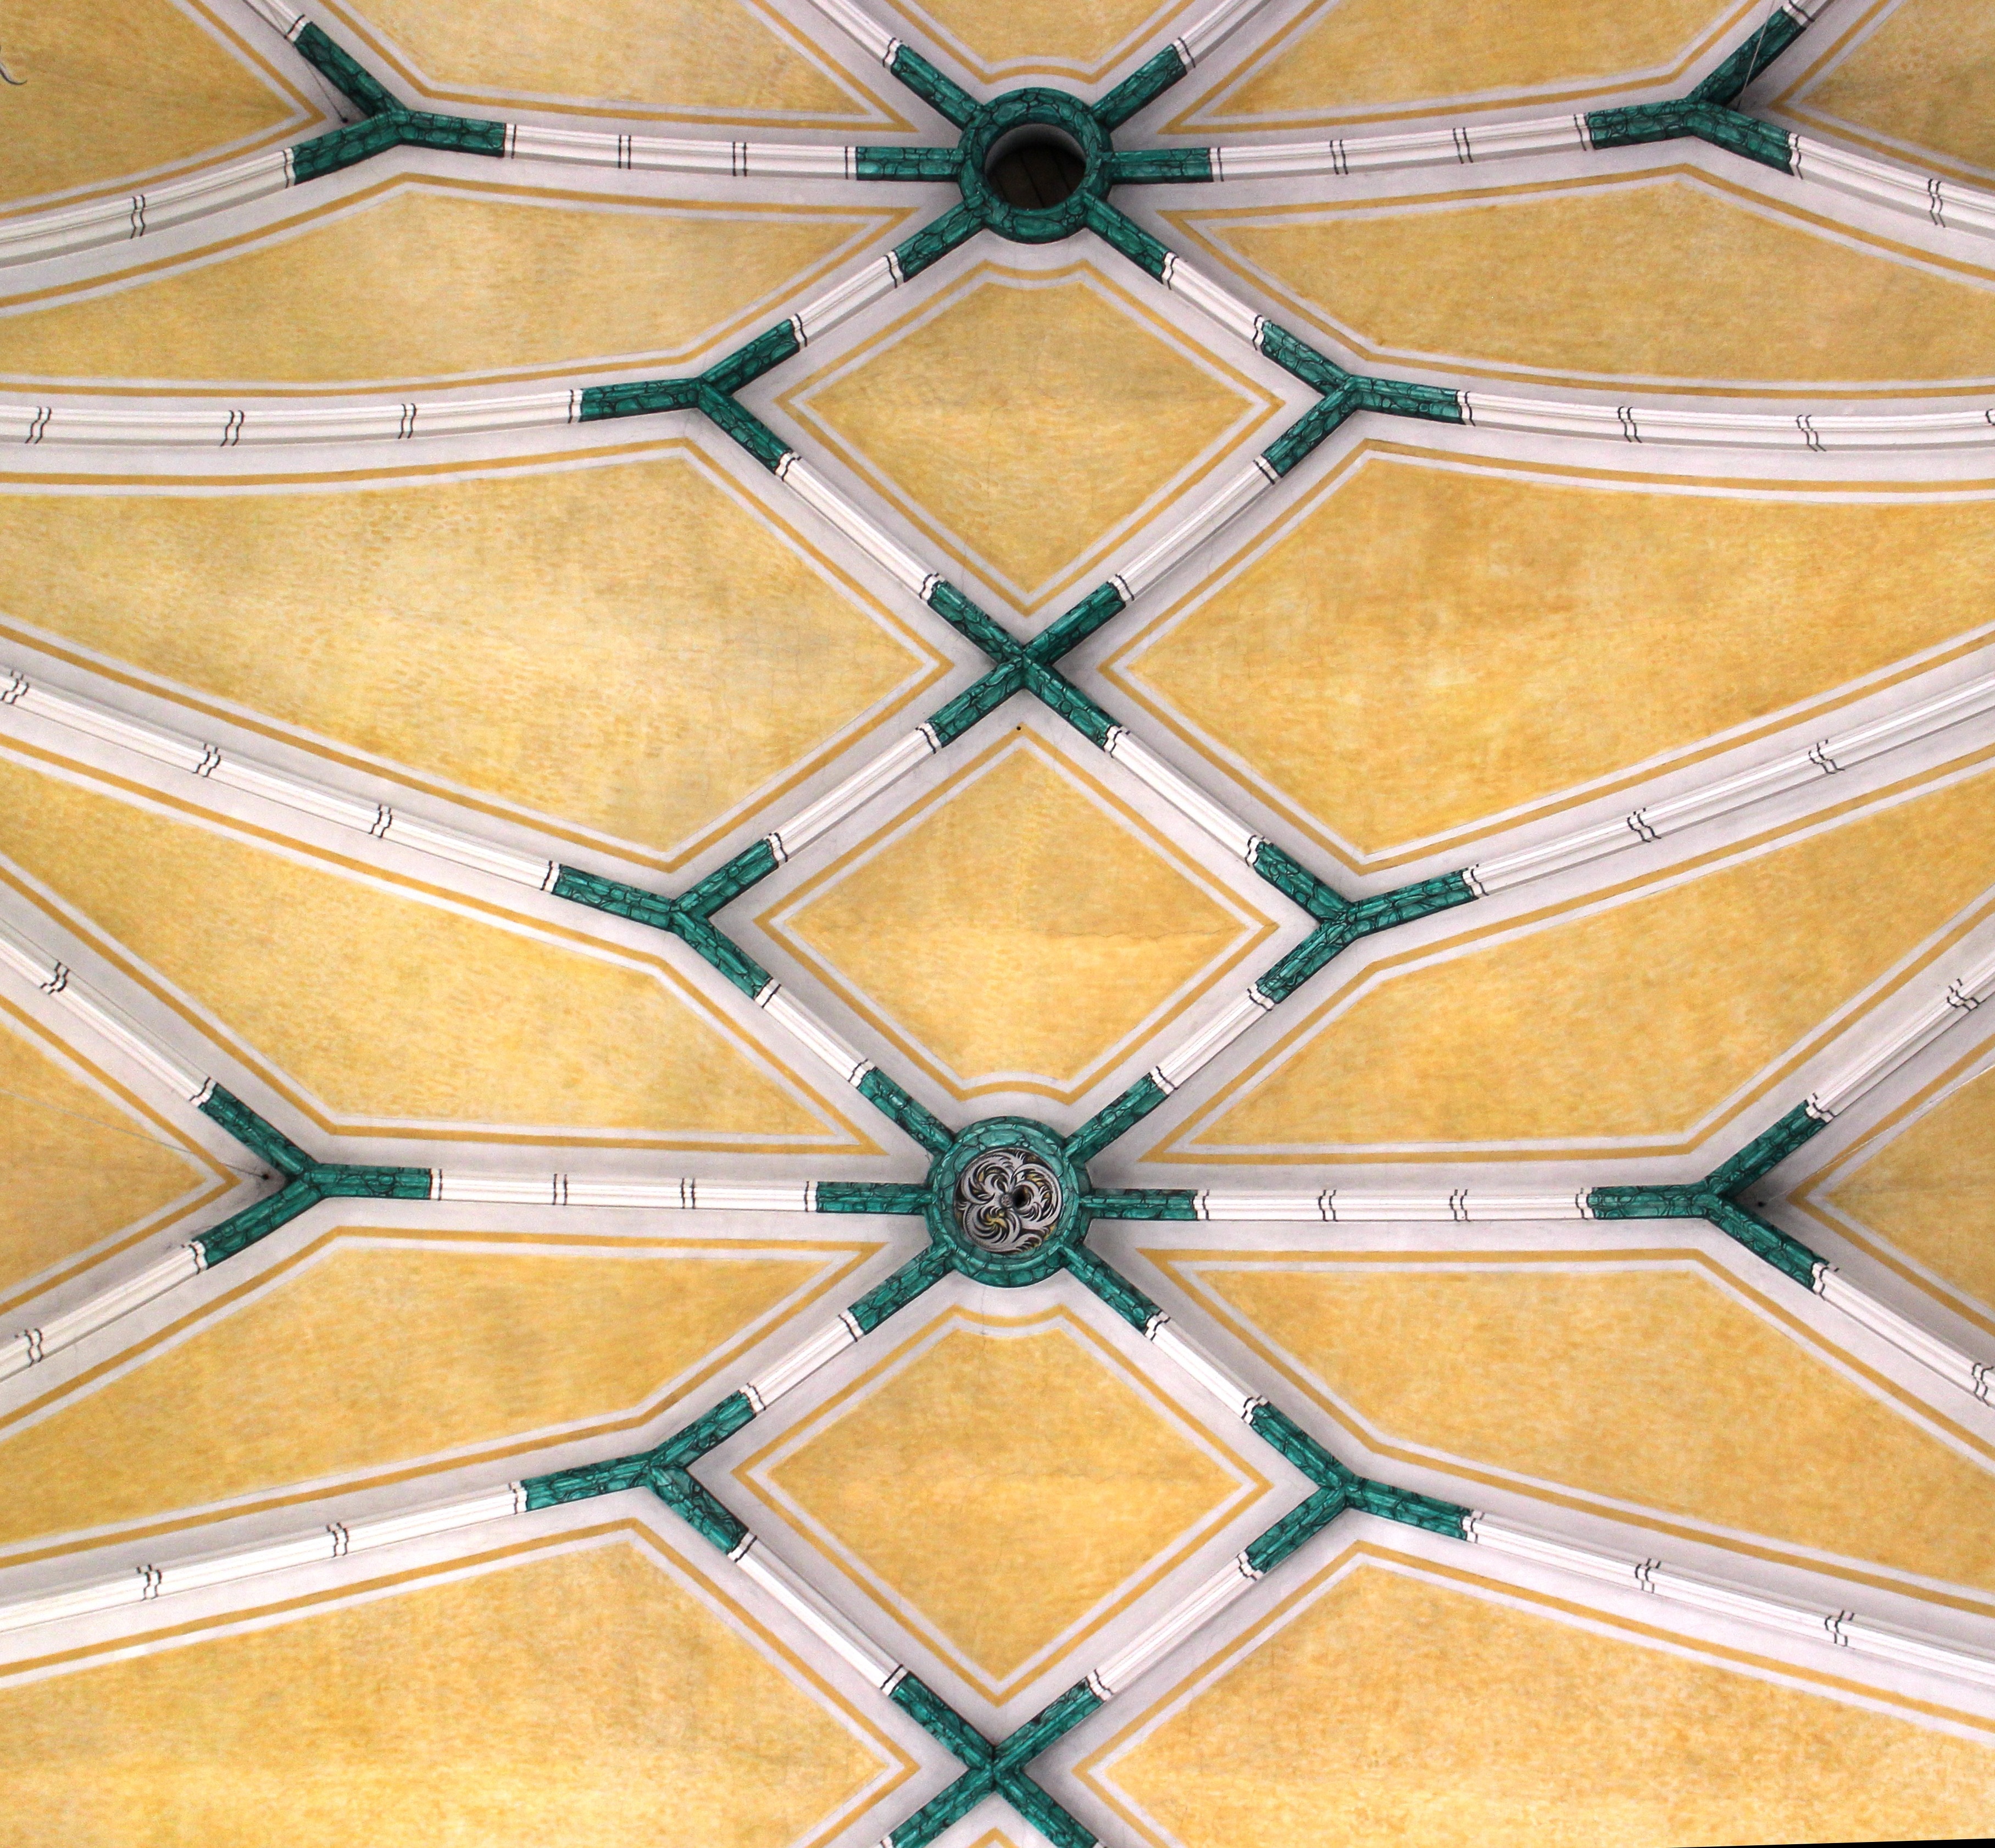 Vaulted Ceilings, Construction, Gothic, pattern, symmetry